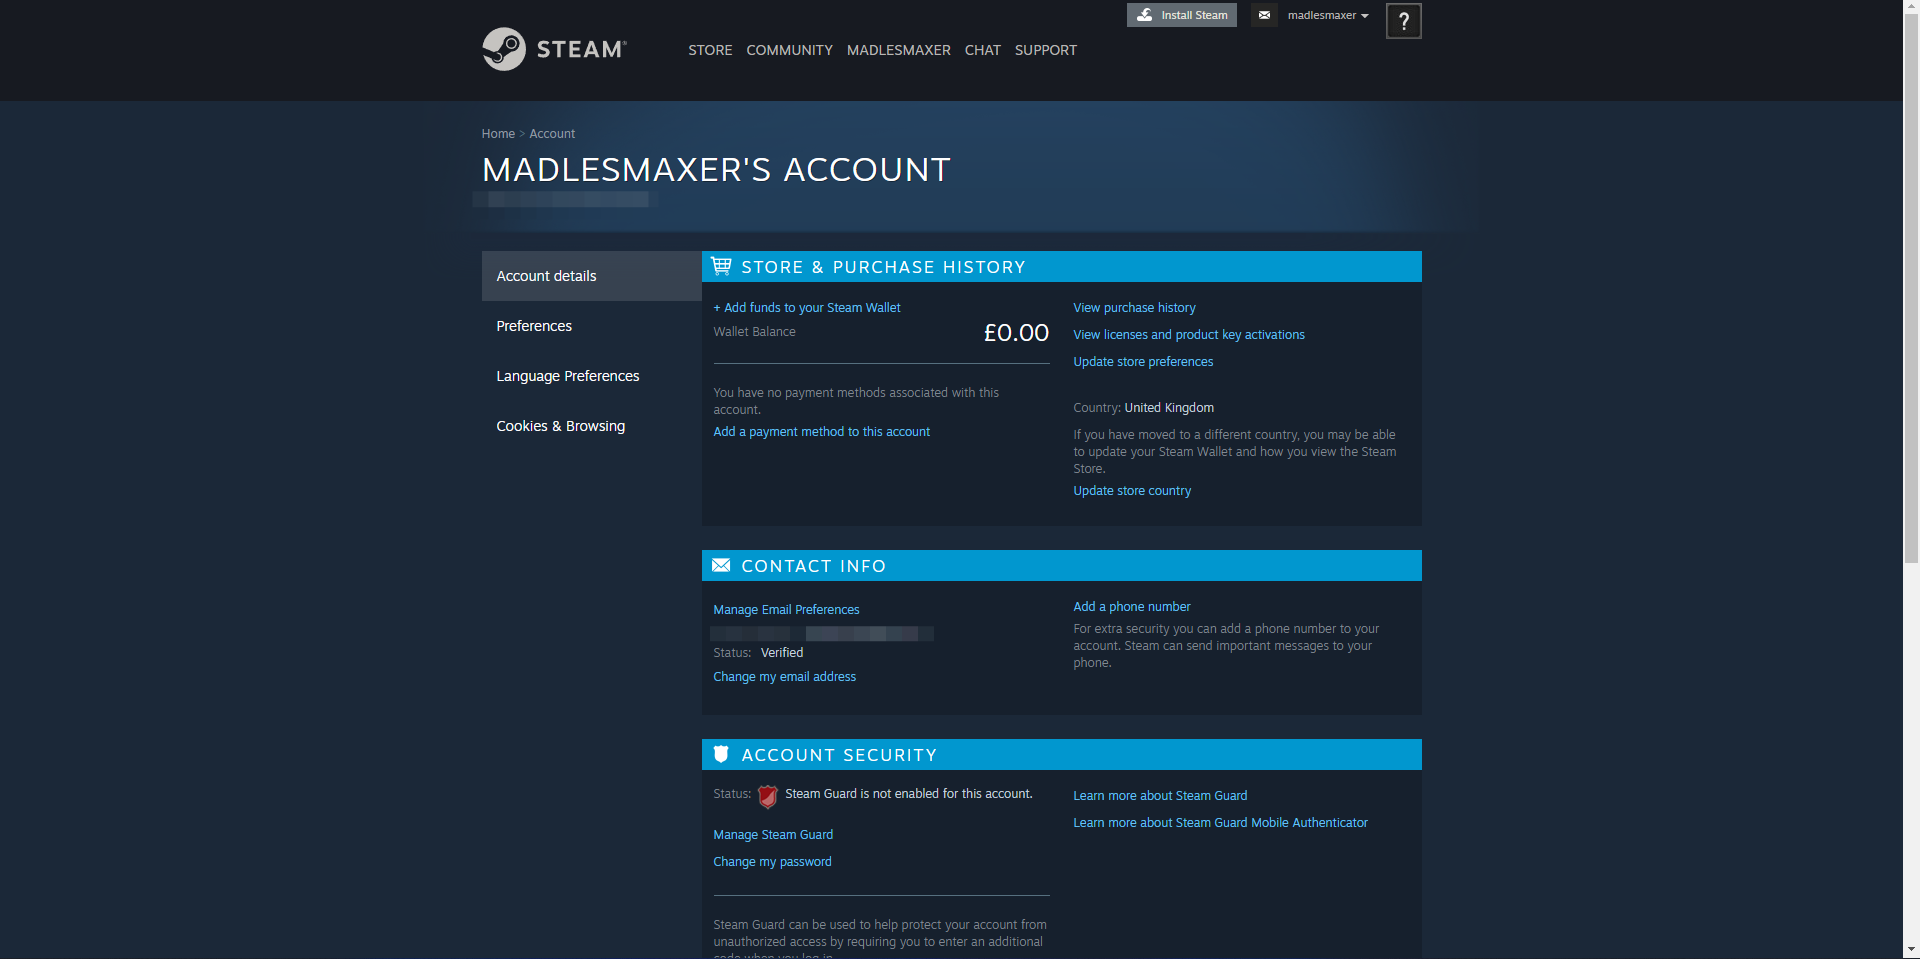 You are not currently logged in to a steam account фото 95